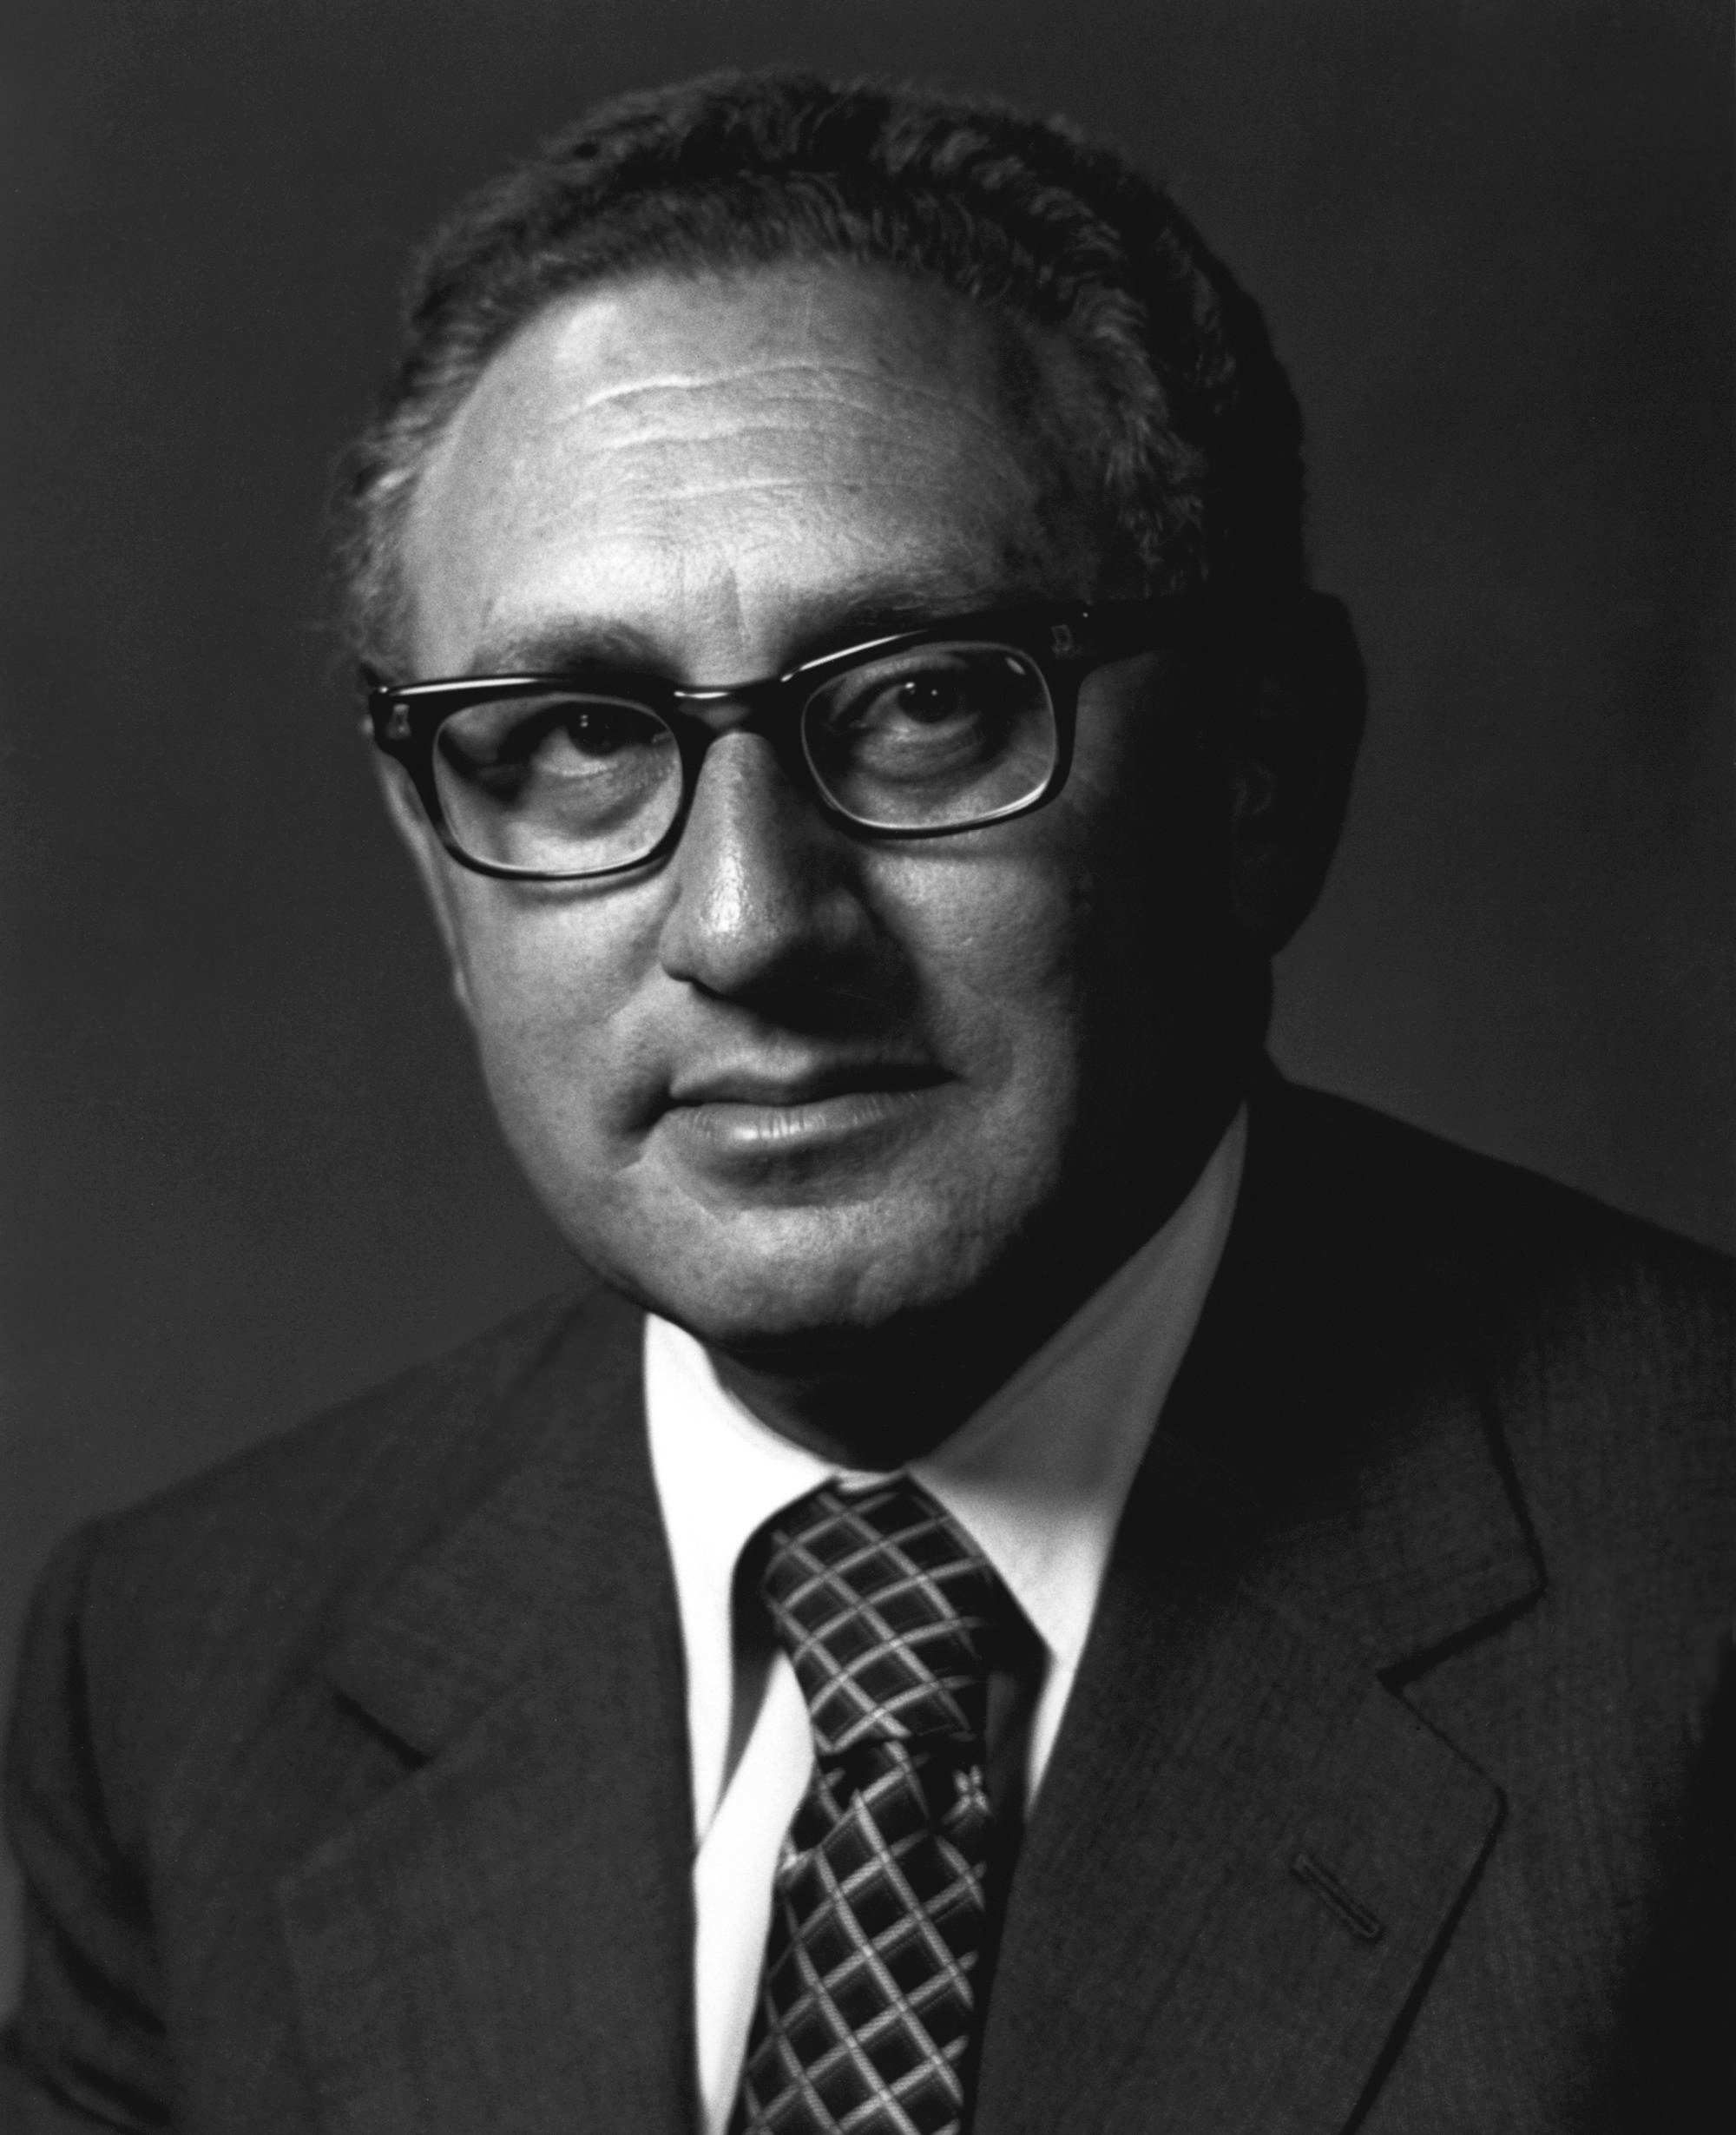 Henry Kissinger and the Art of Middle East Diplomacy